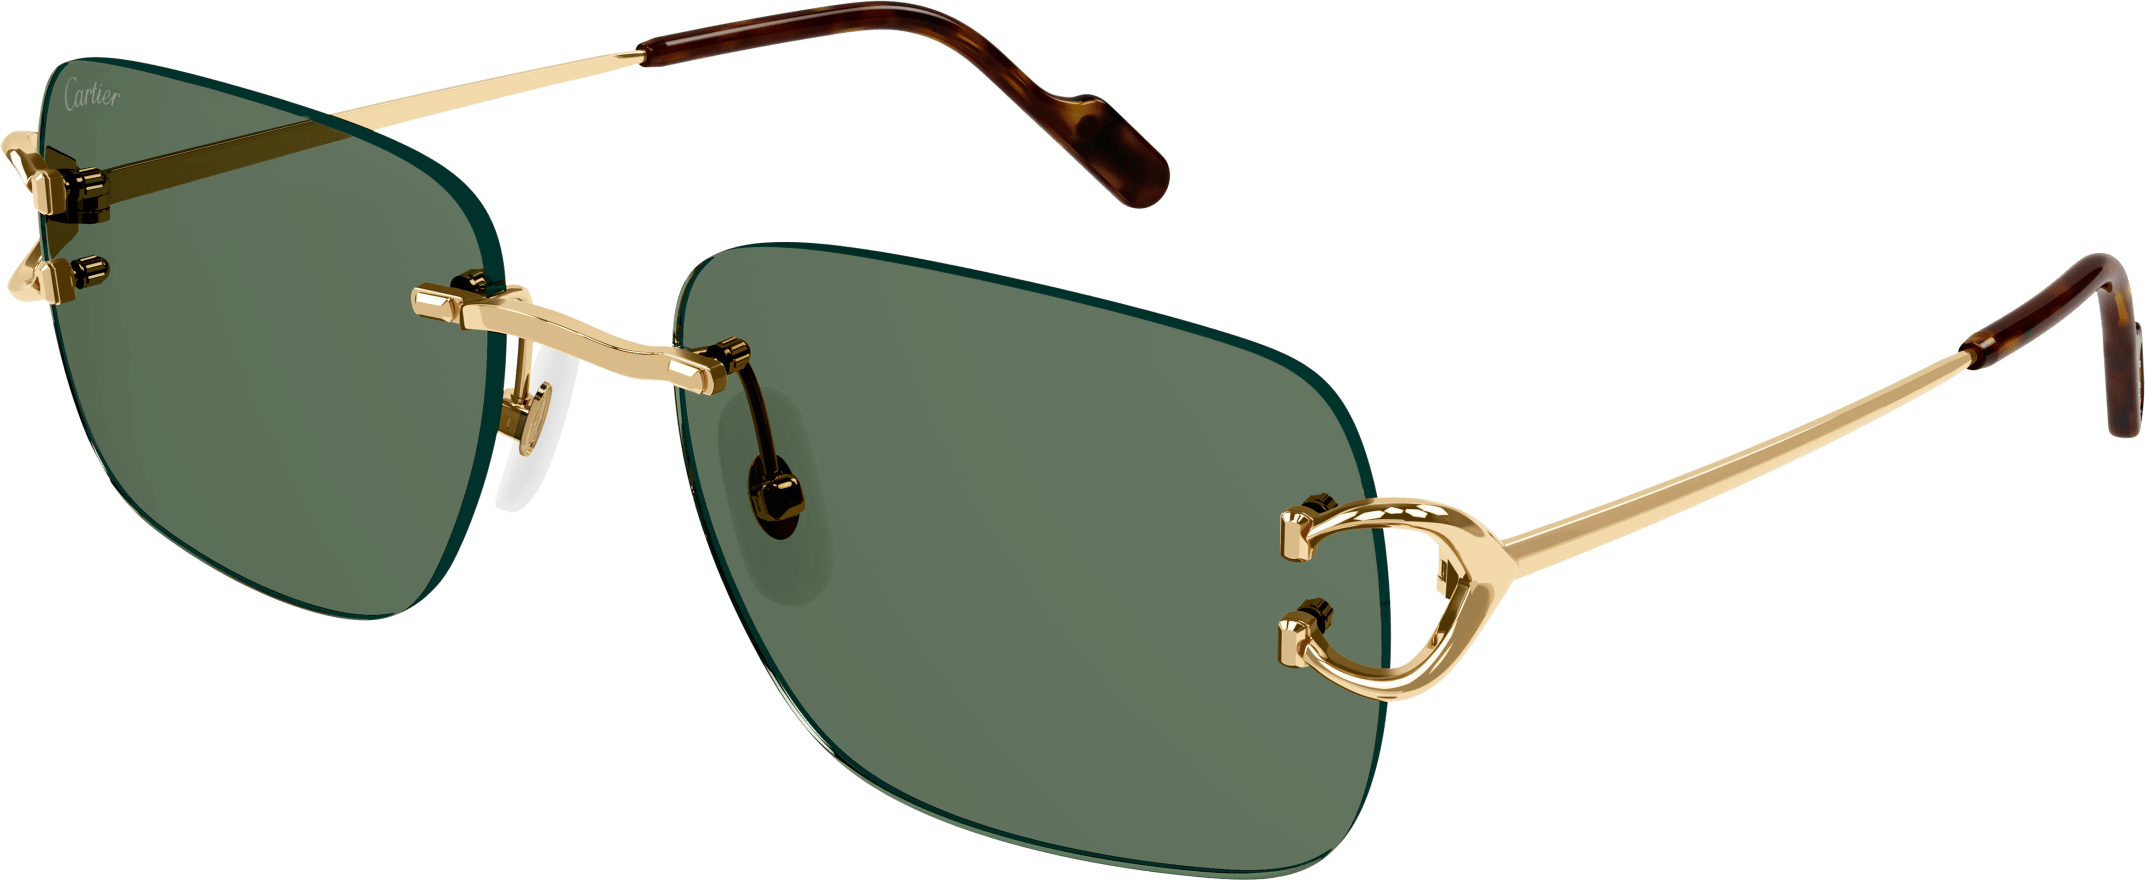 Color_CT0330S-002 - GOLD - GREEN - AR (ANTI REFLECTIVE)